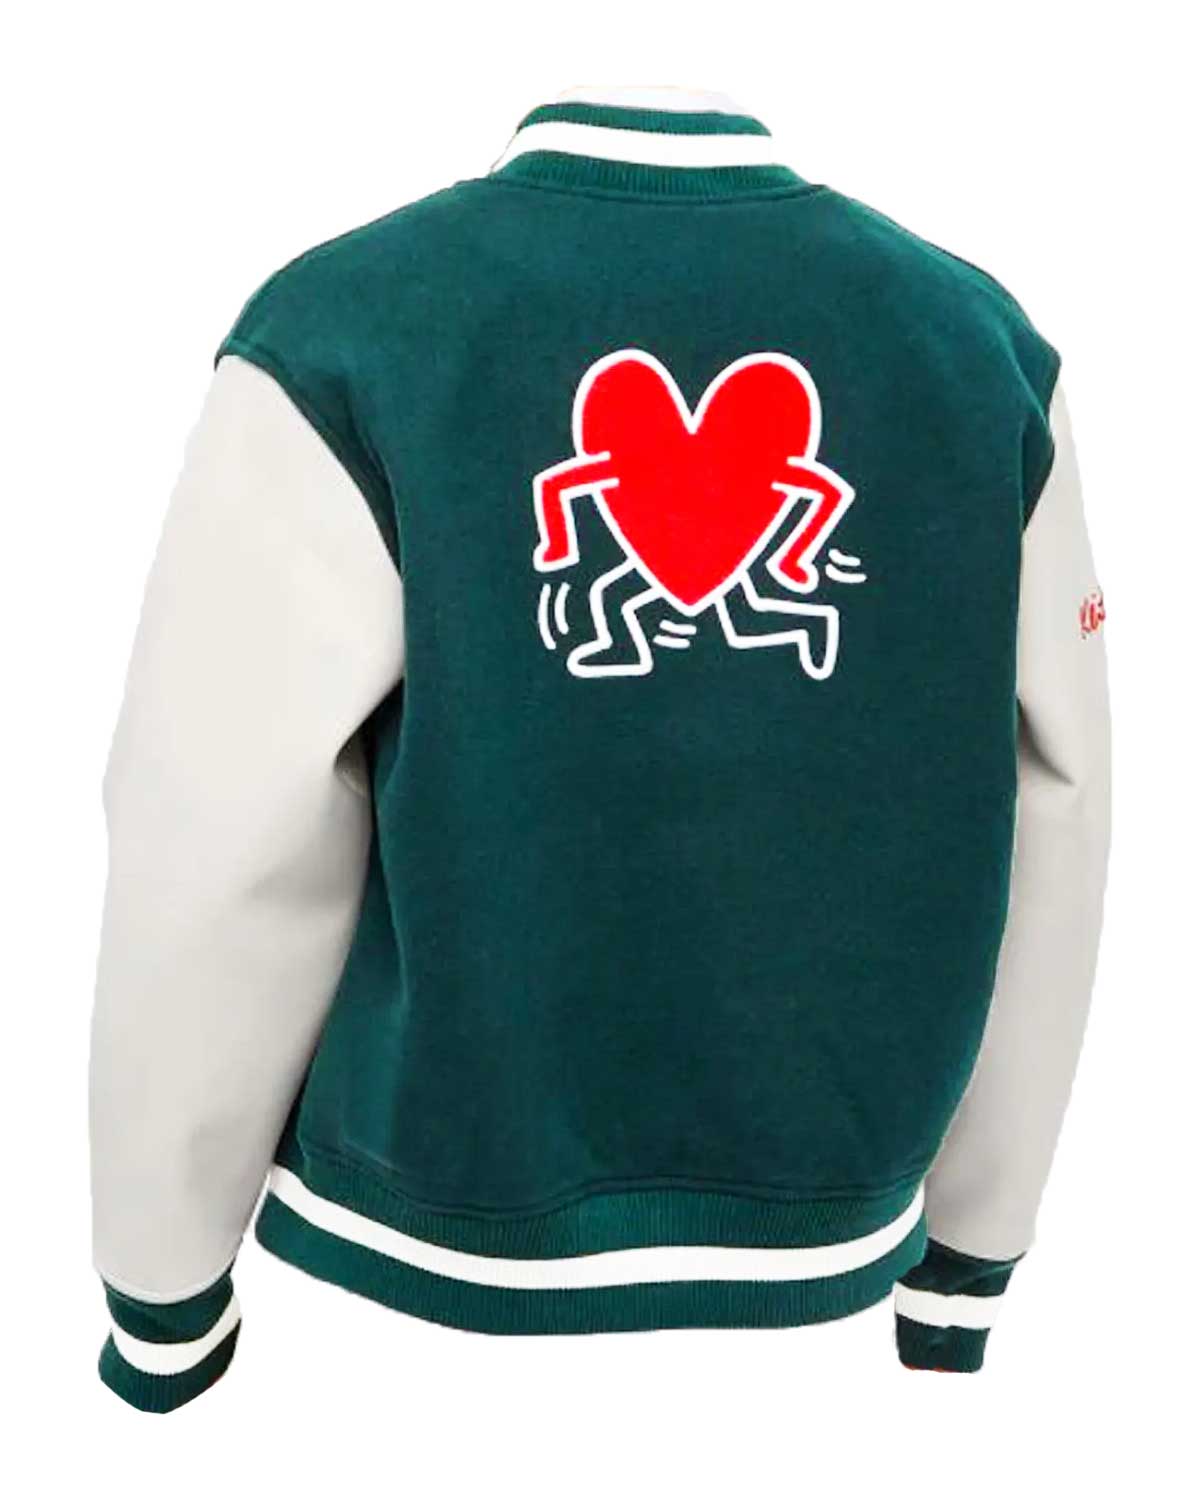 Keith Haring Axel Arigato Green And White Letterman Jacket 